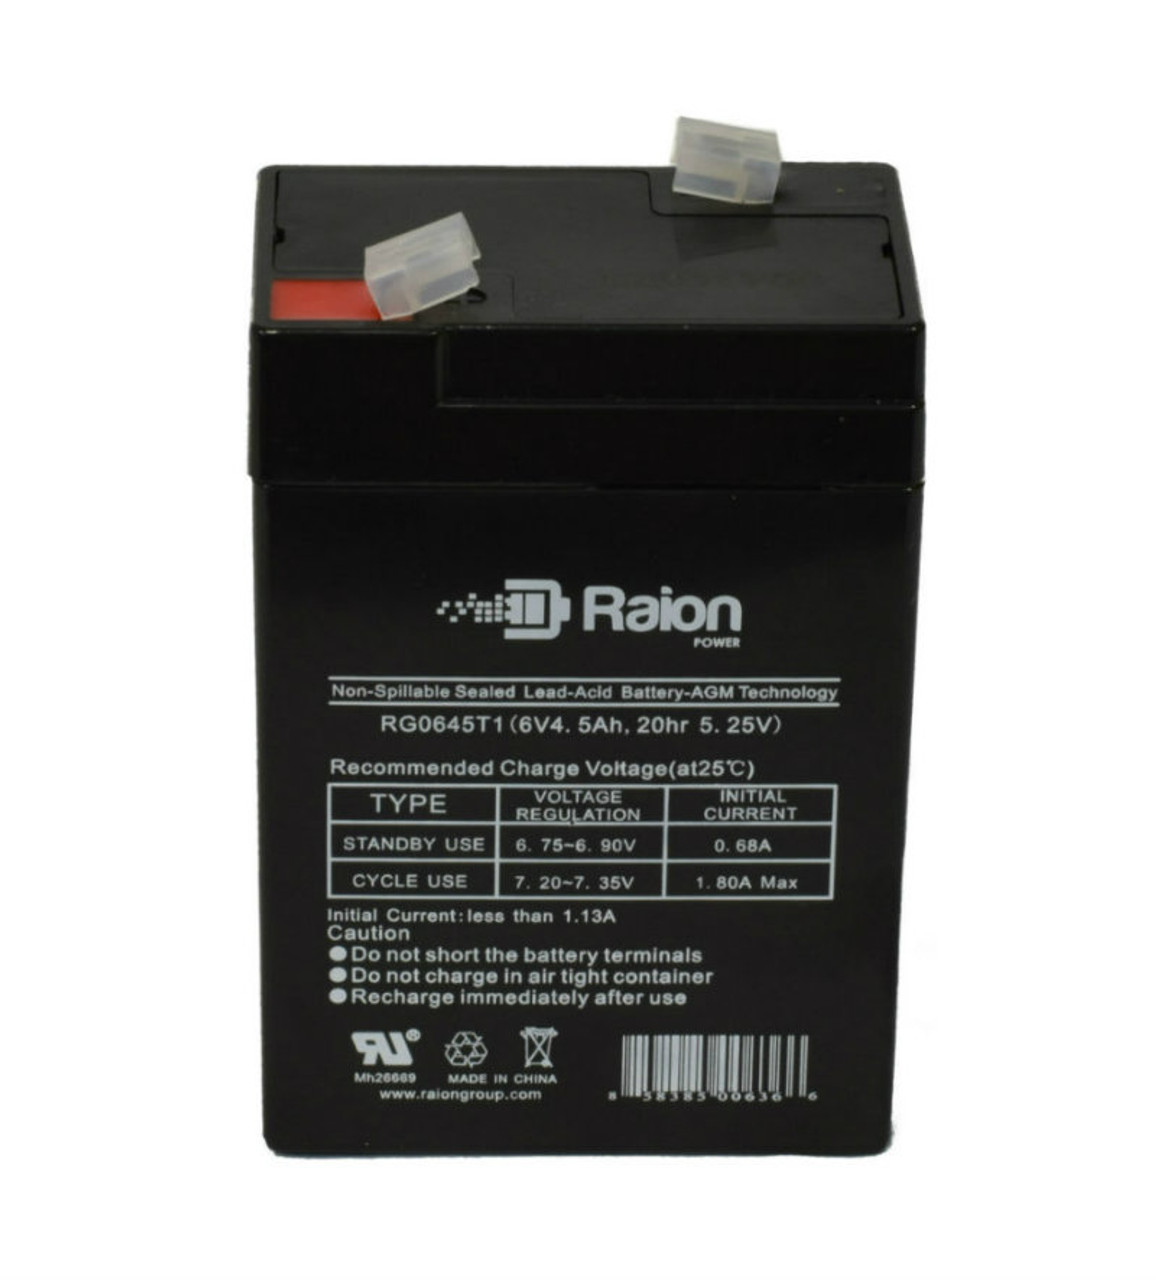 Raion Power RG0645T1 Replacement Battery Cartridge for Orion Research Electrolyte Analyzer